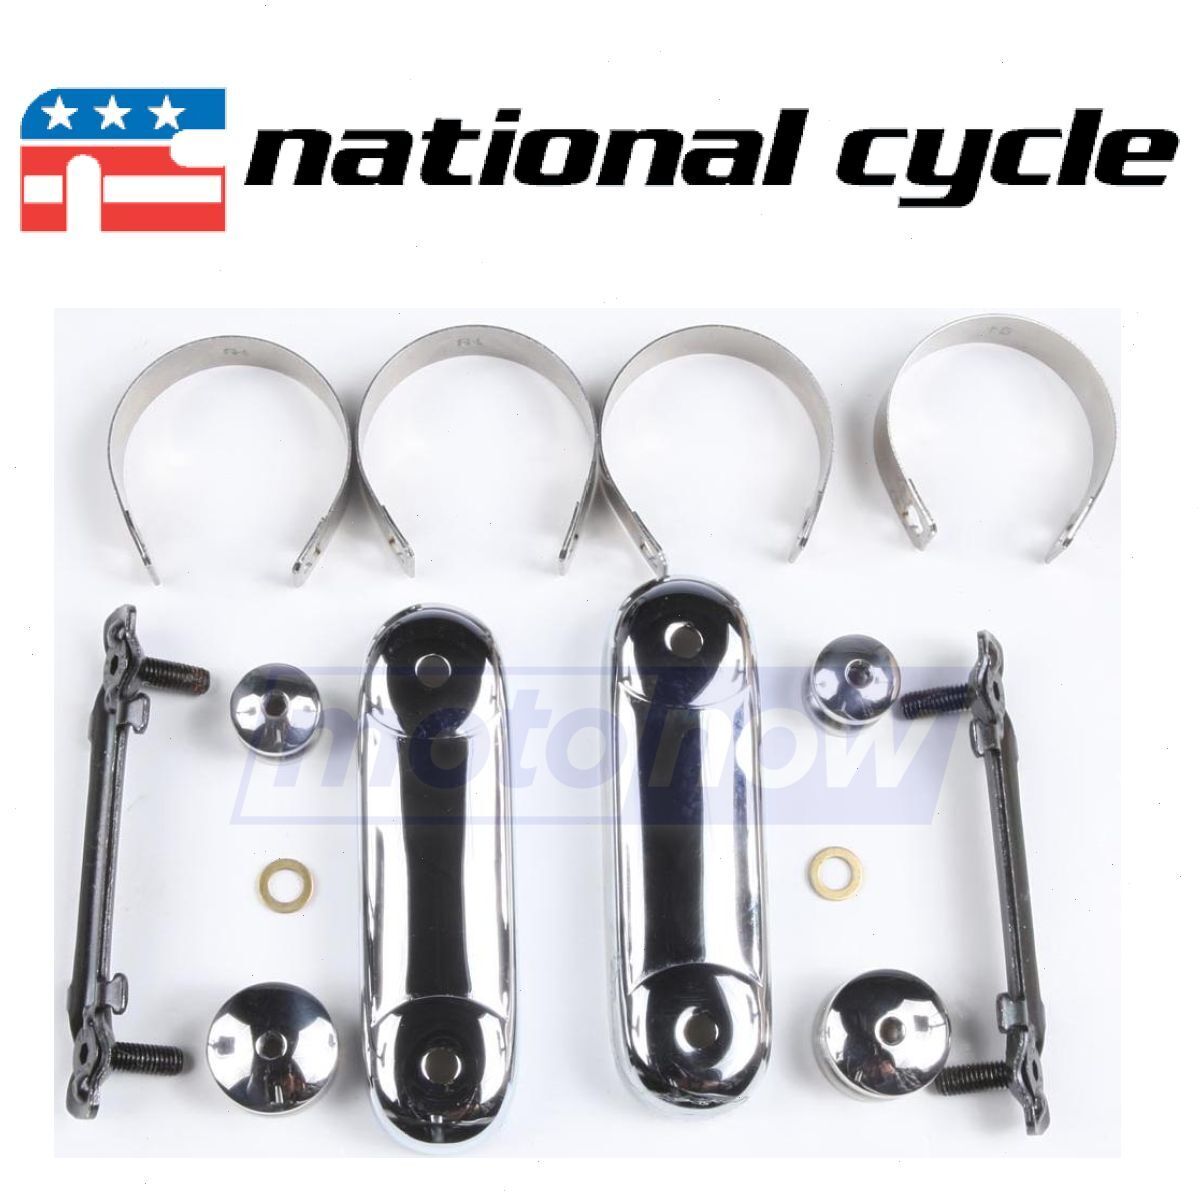 National Cycle SwitchBlade Windshield Mount Kit for 1996-2019 Harley mx